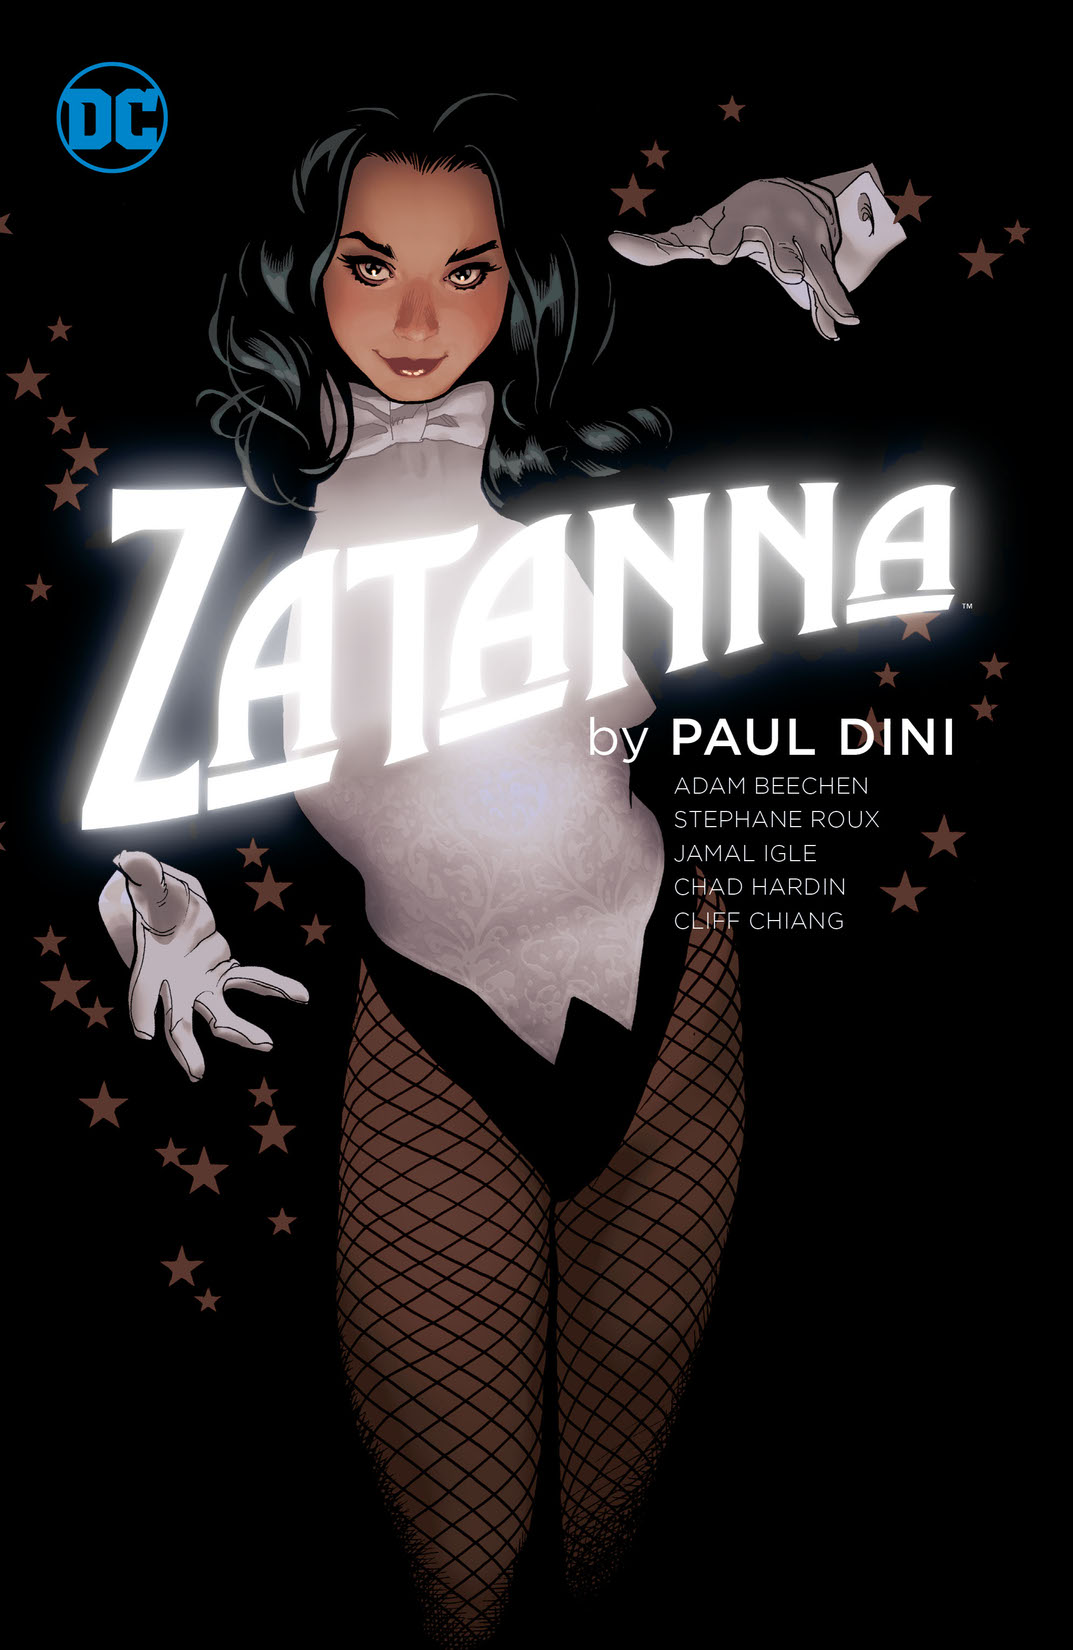 Zatanna by Paul Dini preview images